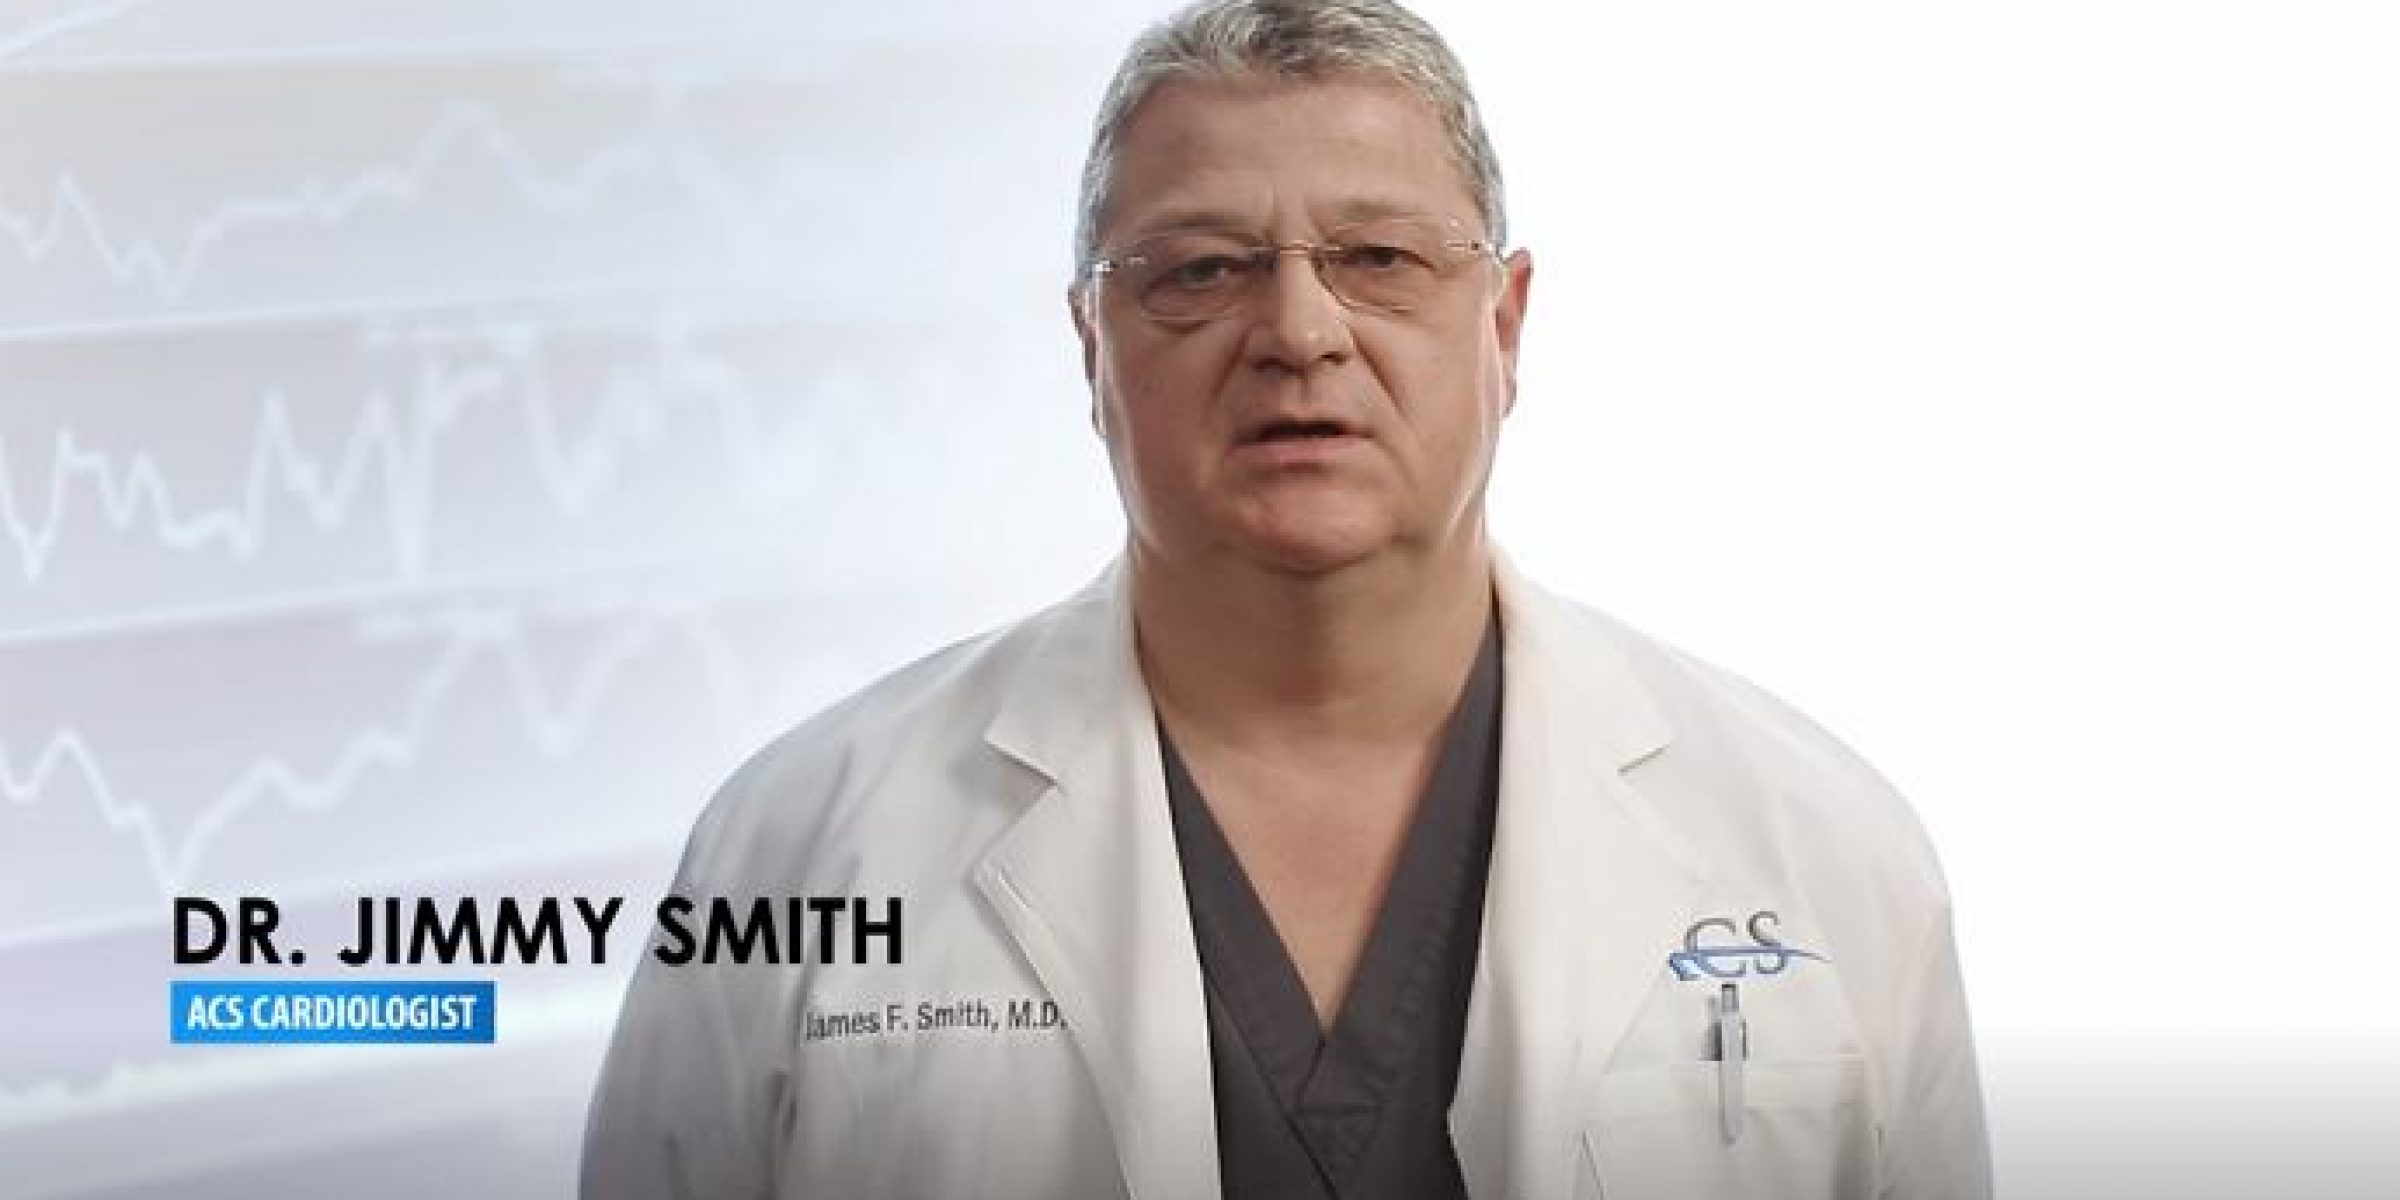 Cardiologist, Interventional Cardiologist, Shreveport Cardiologist, Shreveport Interventional Cardiologist, Advanced Cardiovascular Specialists, Dr. Jimmy Smith